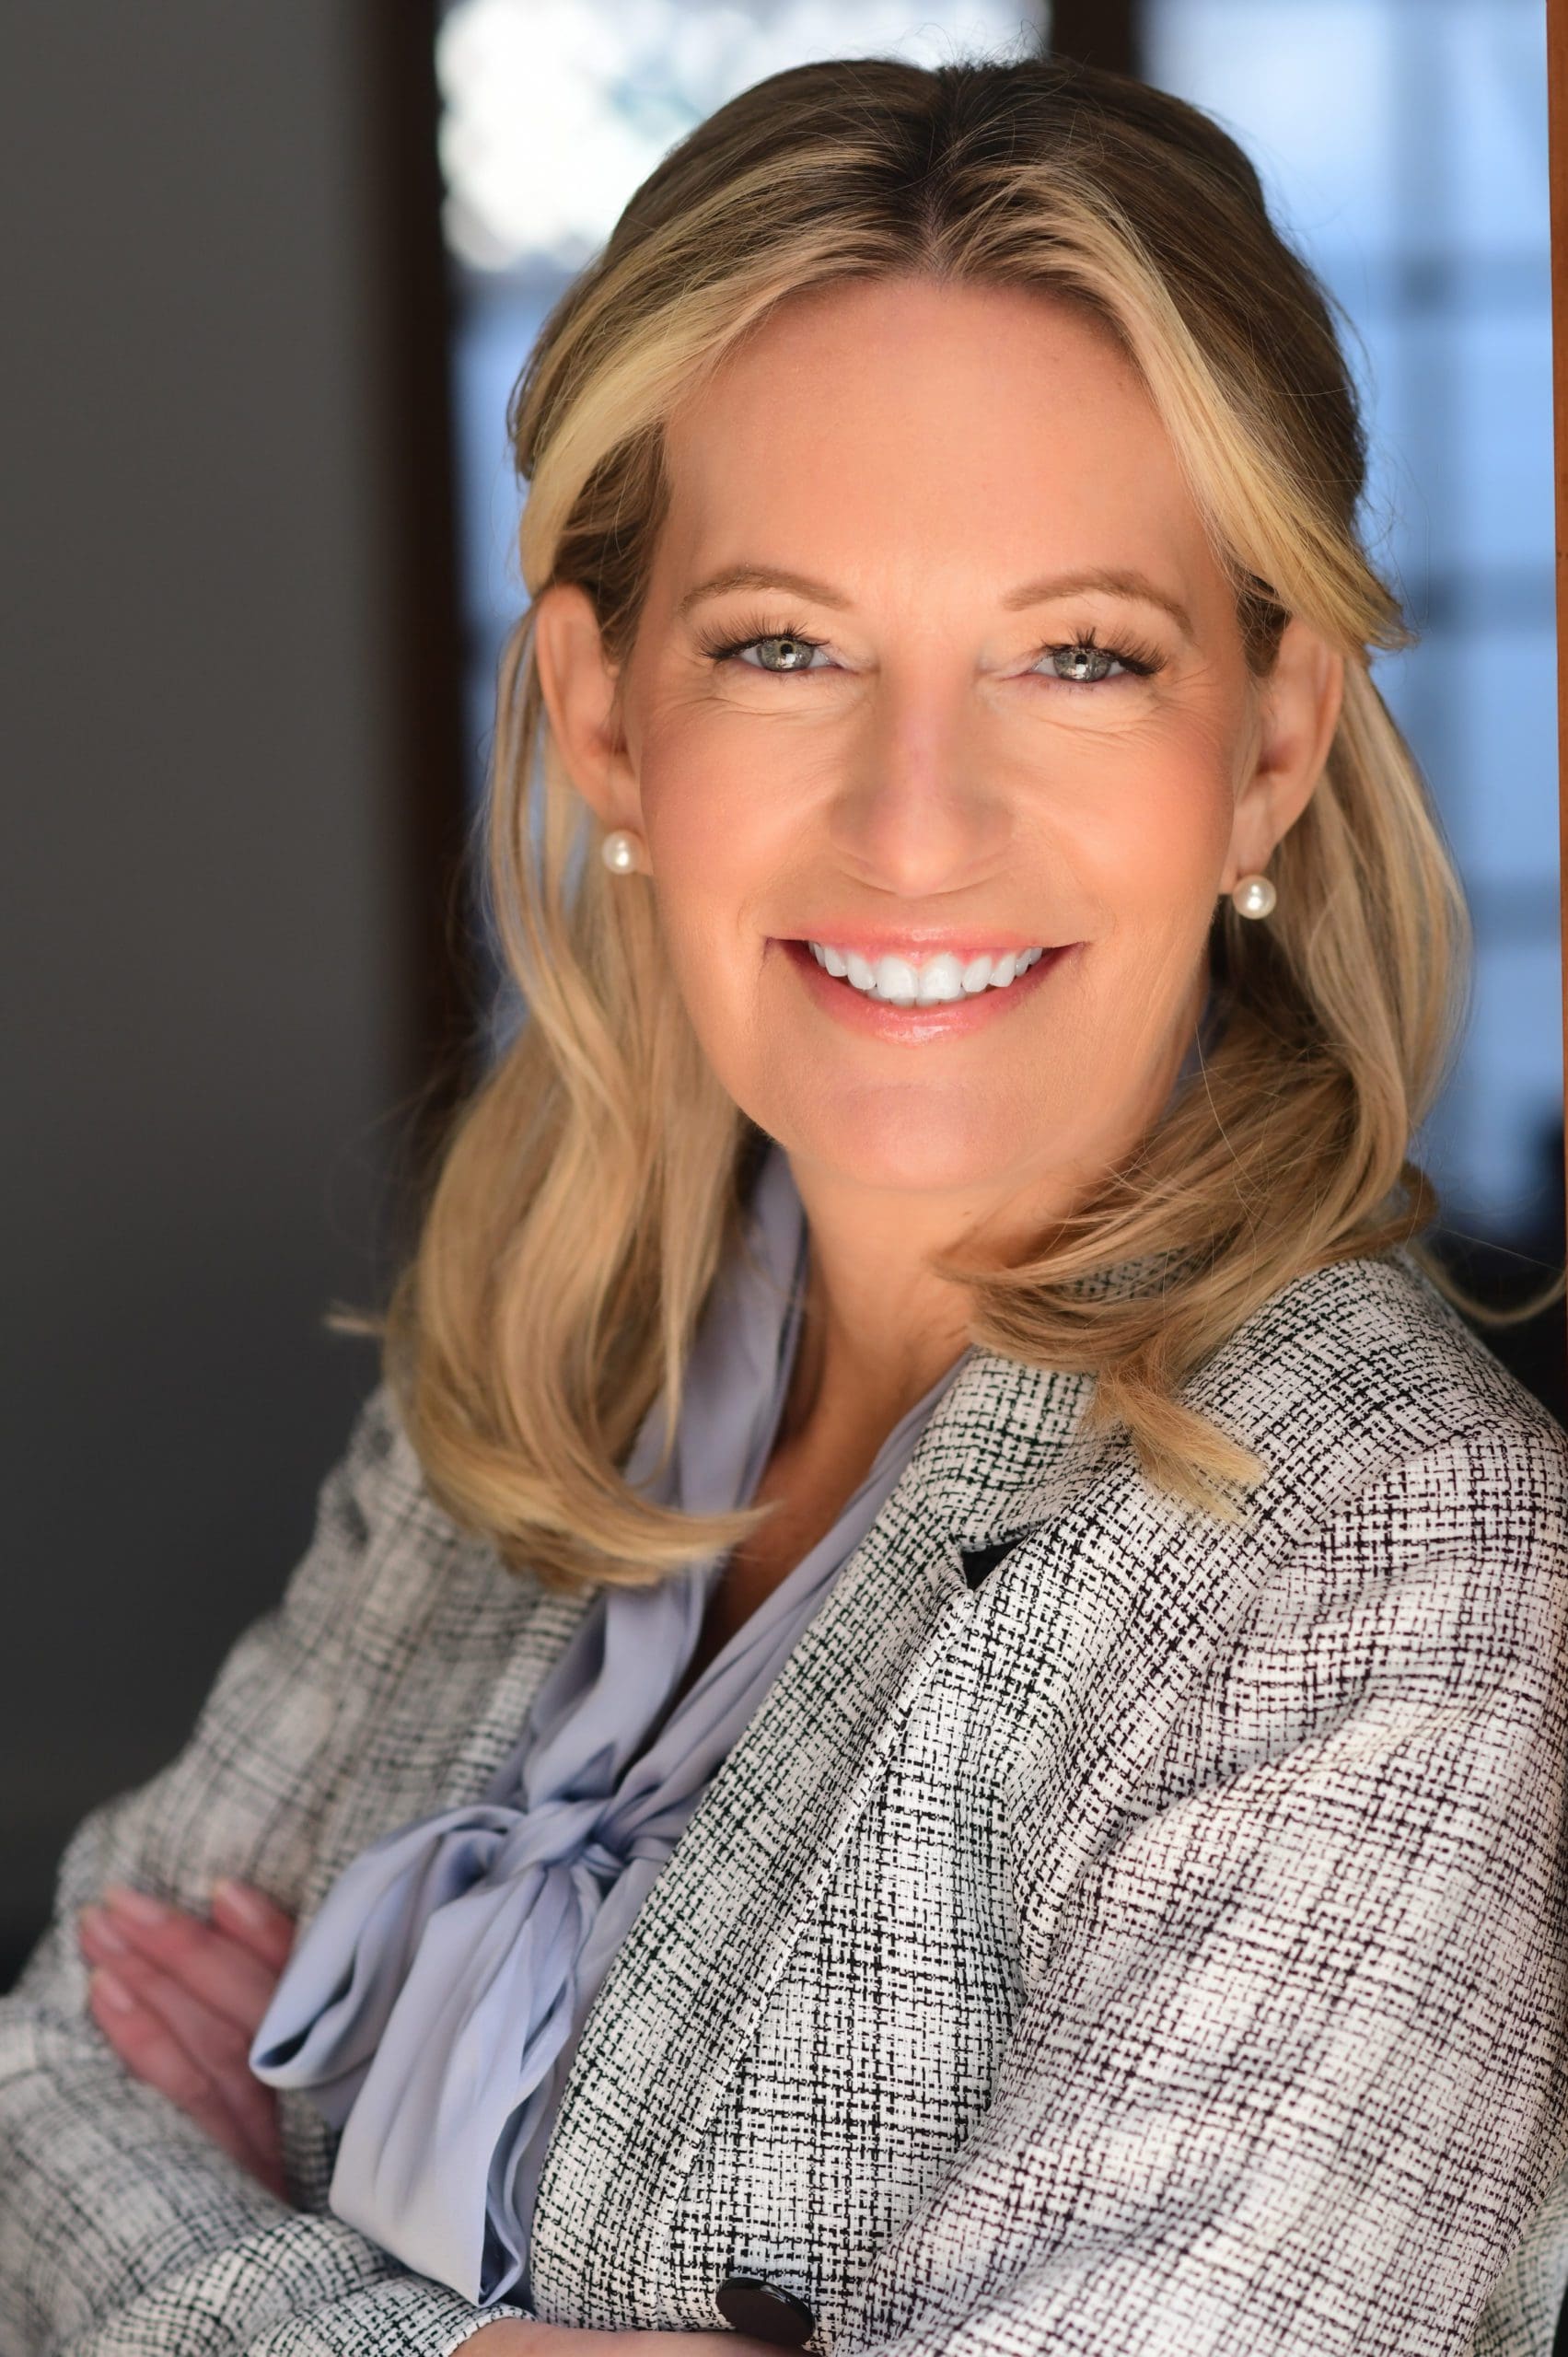 Attorney Kelly Hyman, with a warm smile, presents a professional demeanor at The Hyman Law Firm P.A., located in West Palm Beach, Florida. Her blonde hair and polished appearance, featuring a stylish tweed blazer and light blue blouse, complement the modern office backdrop with expansive windows that hint at the West Palm Beach urban landscape.